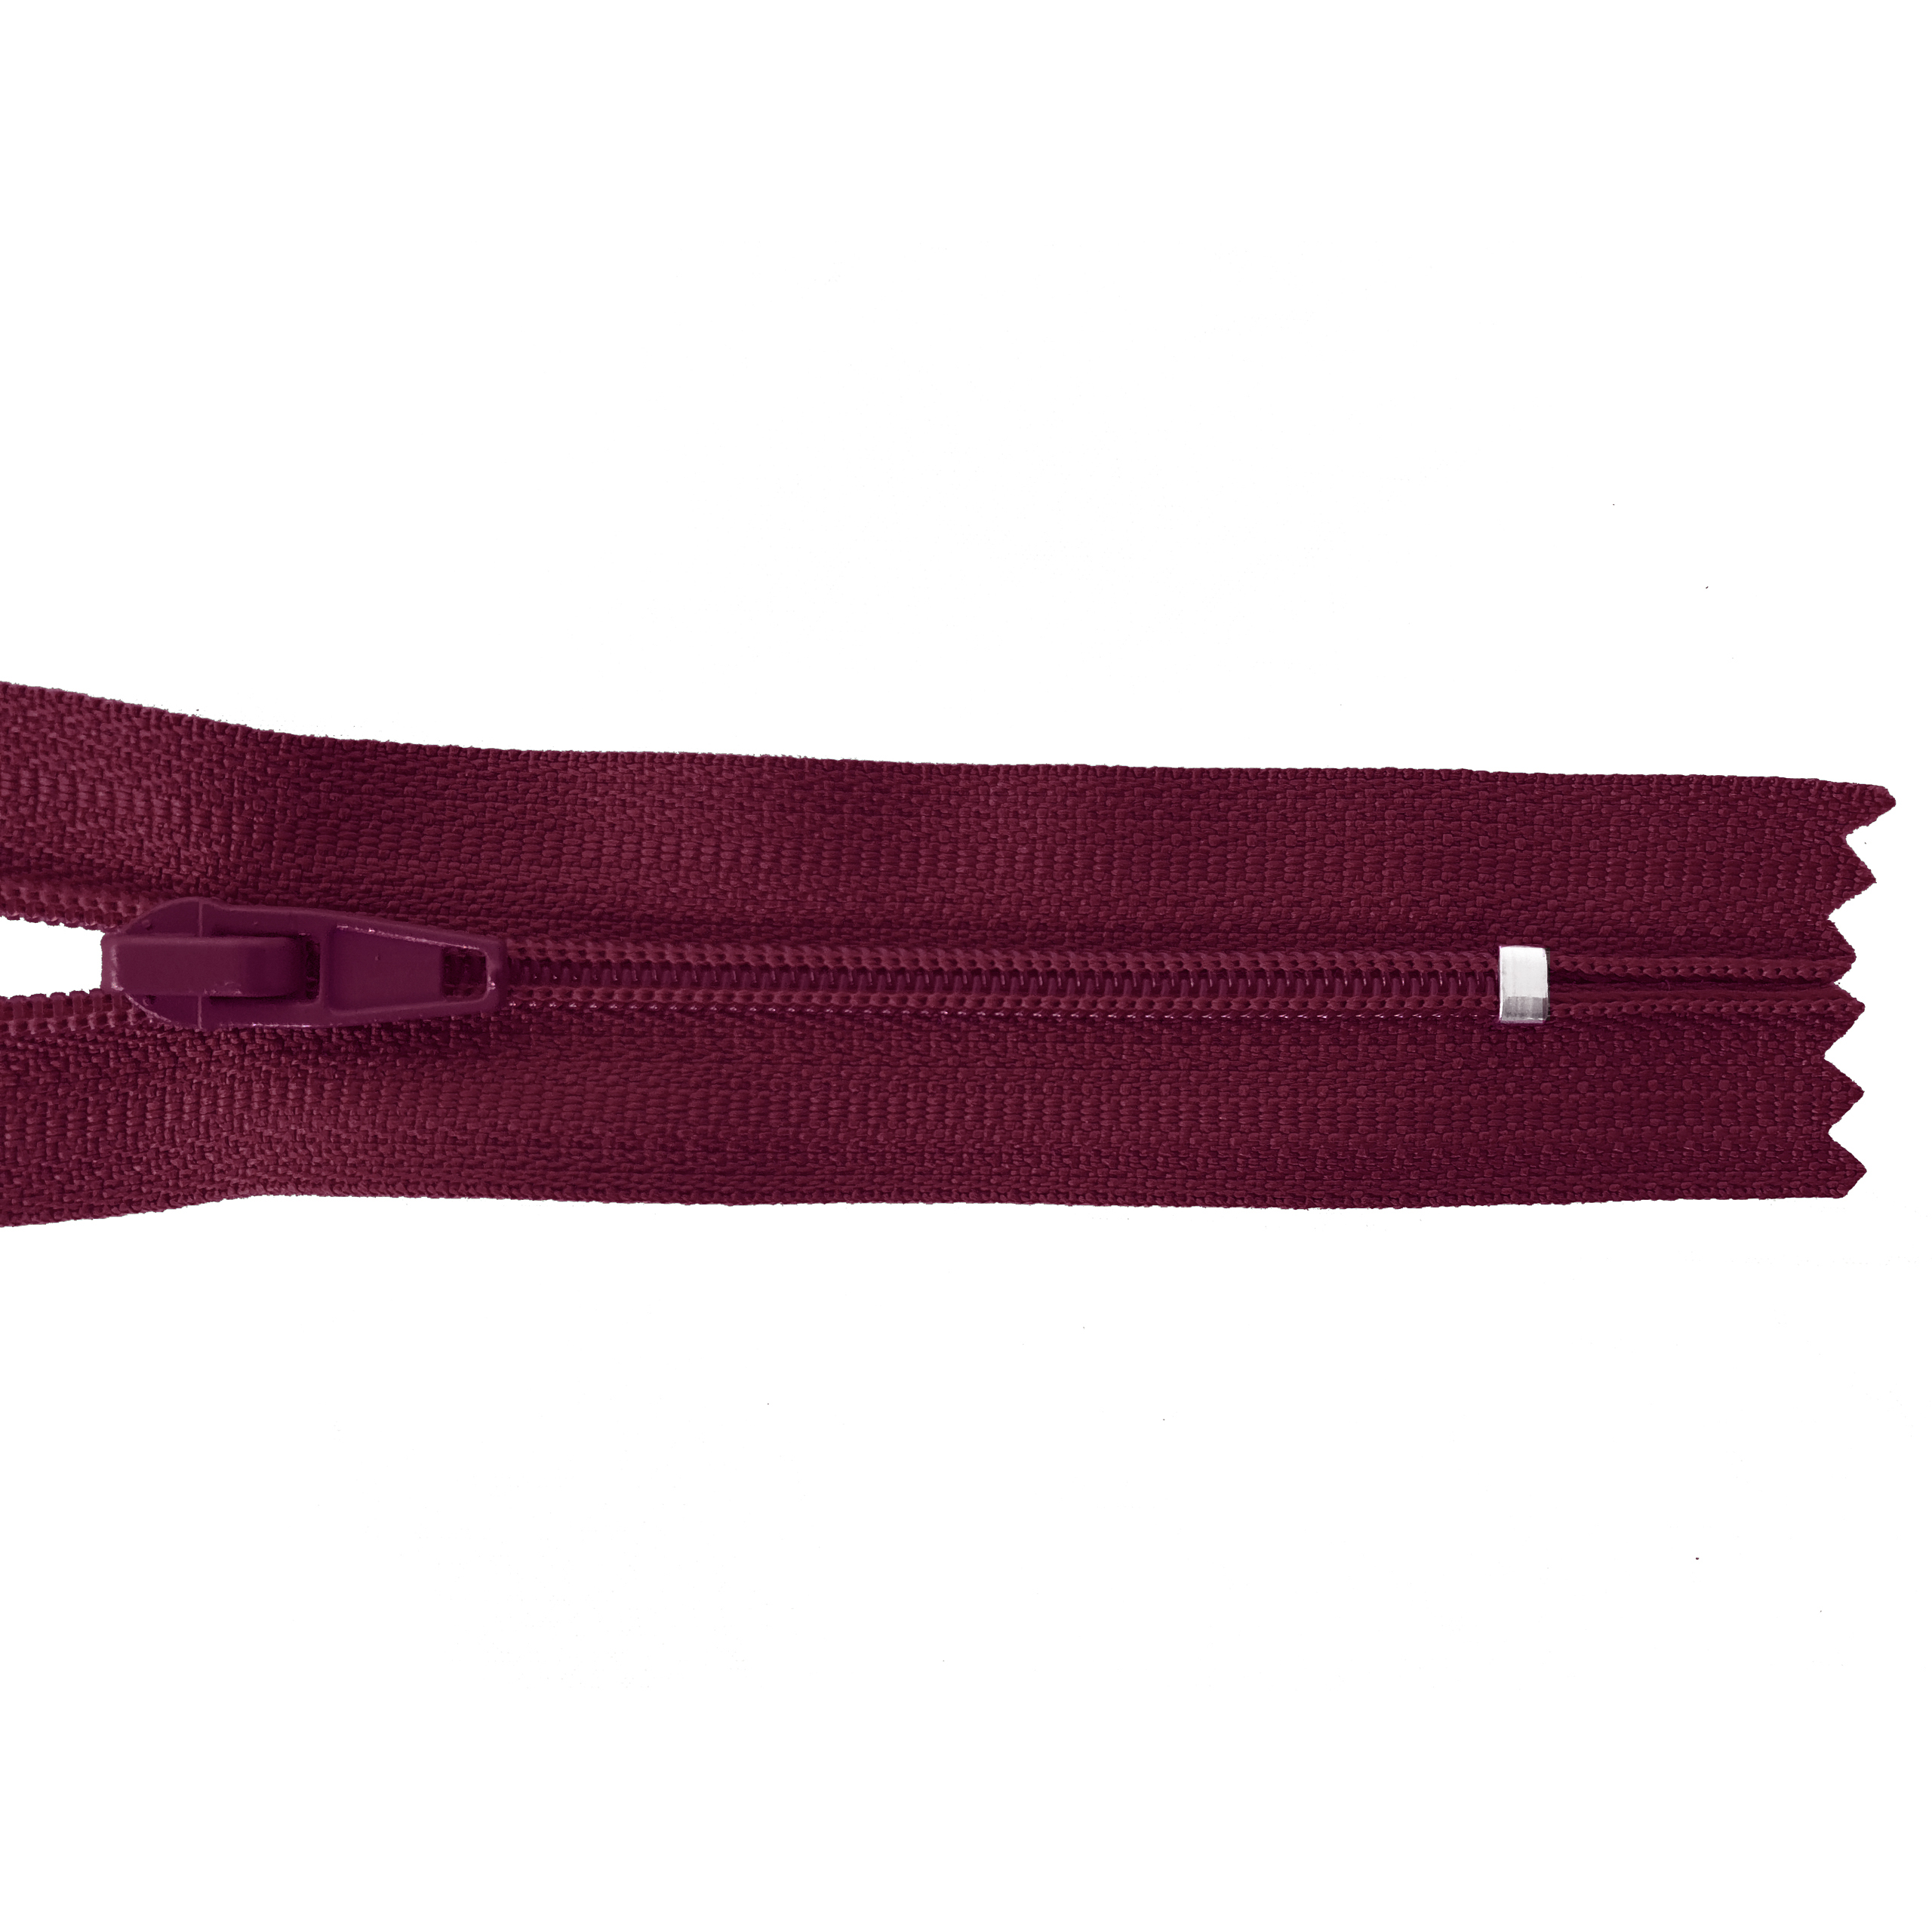 zipper 12cm,not divisible, PES spiral, fein, wine red